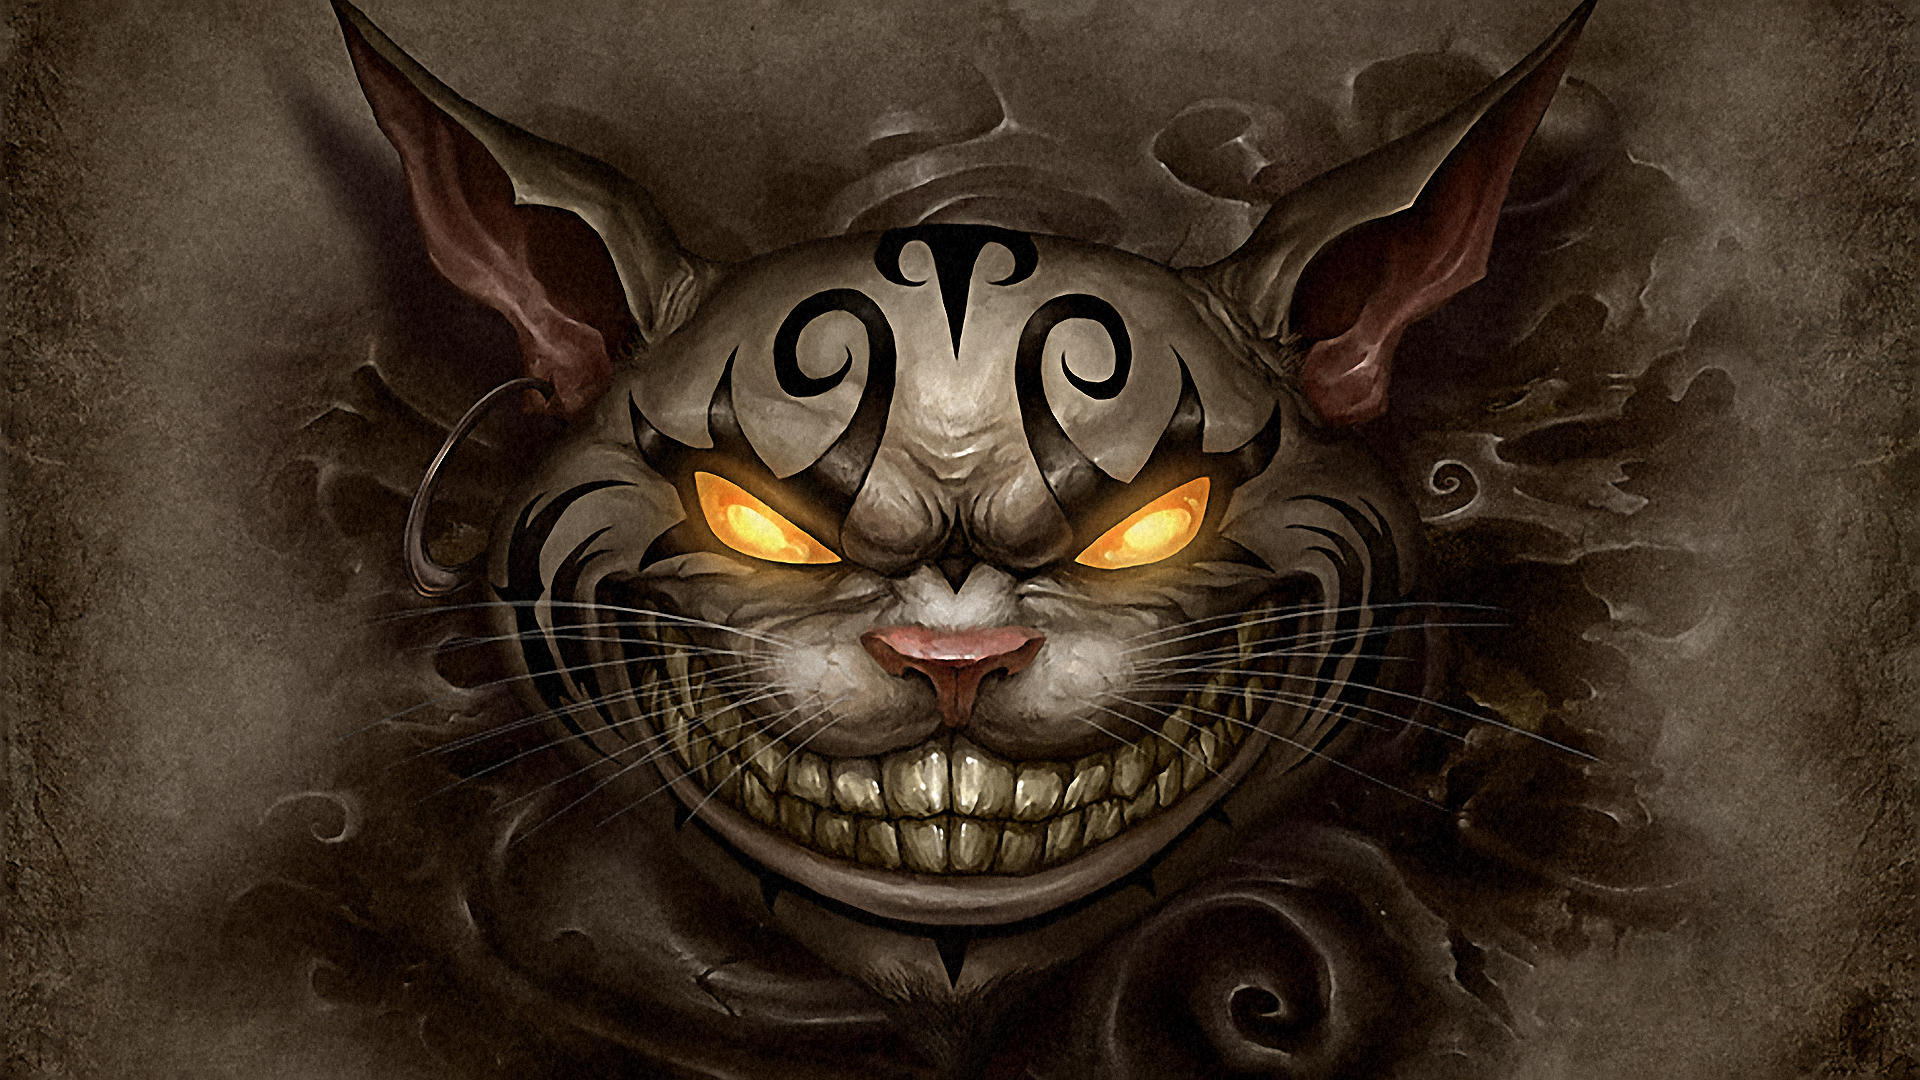 Quotes From The Cheshire Cat in Alice in Wonderland Cat Alice in